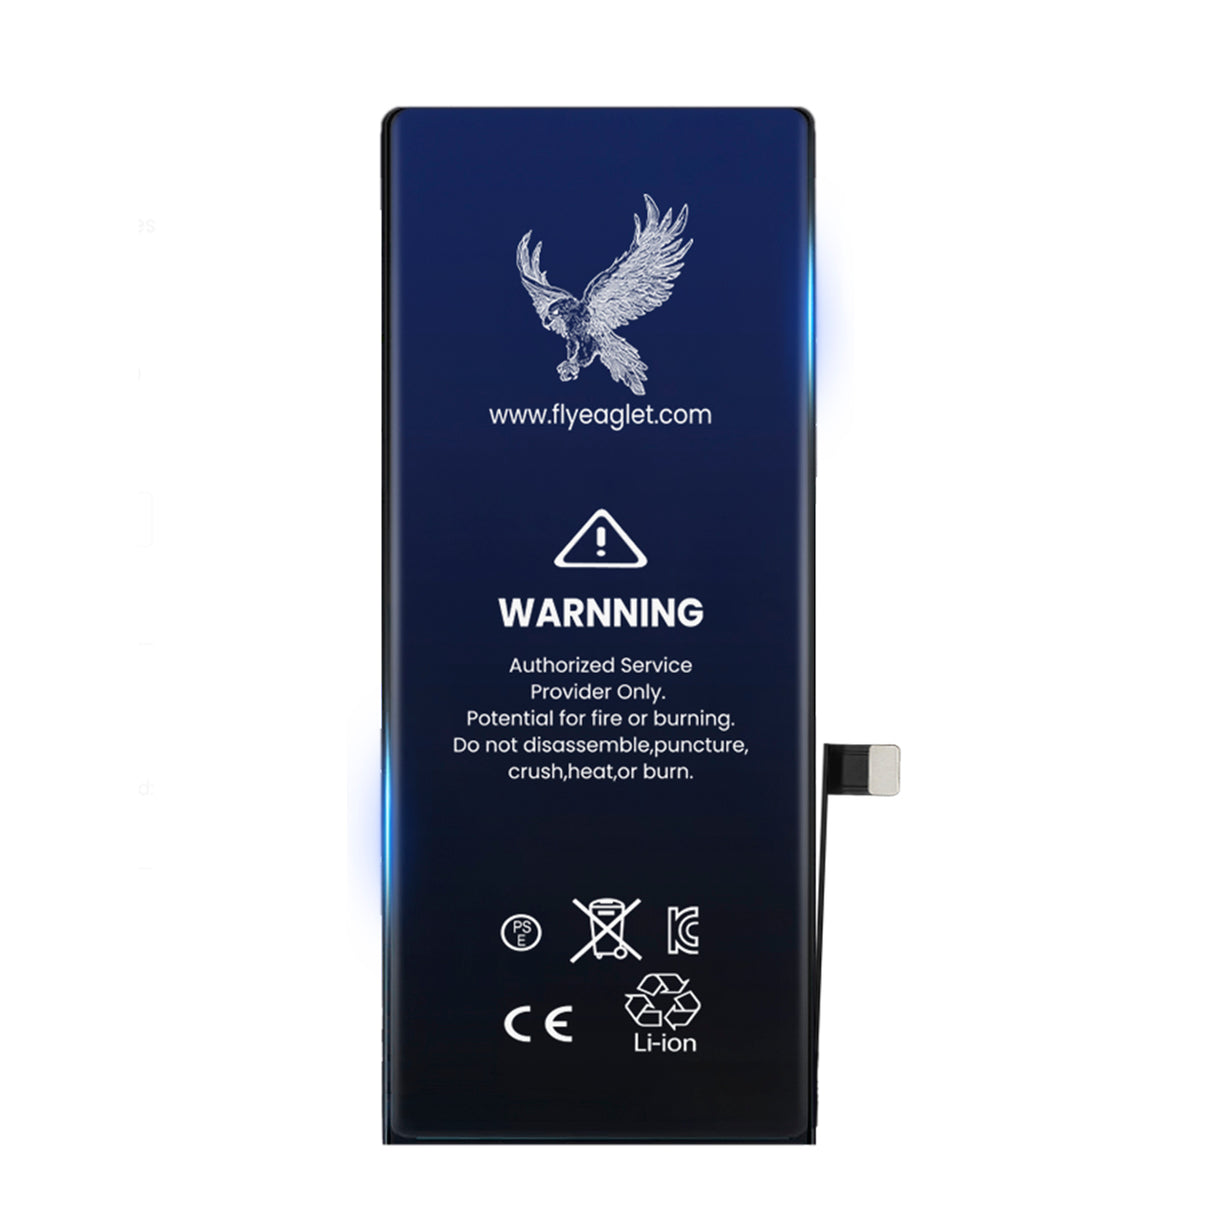 High Capacity iPhone XR Battery Replacement Original BMS Low Impedance & 800 Cycles Maximum |3500 mAh|-Fly Eagle Feaglet Battery